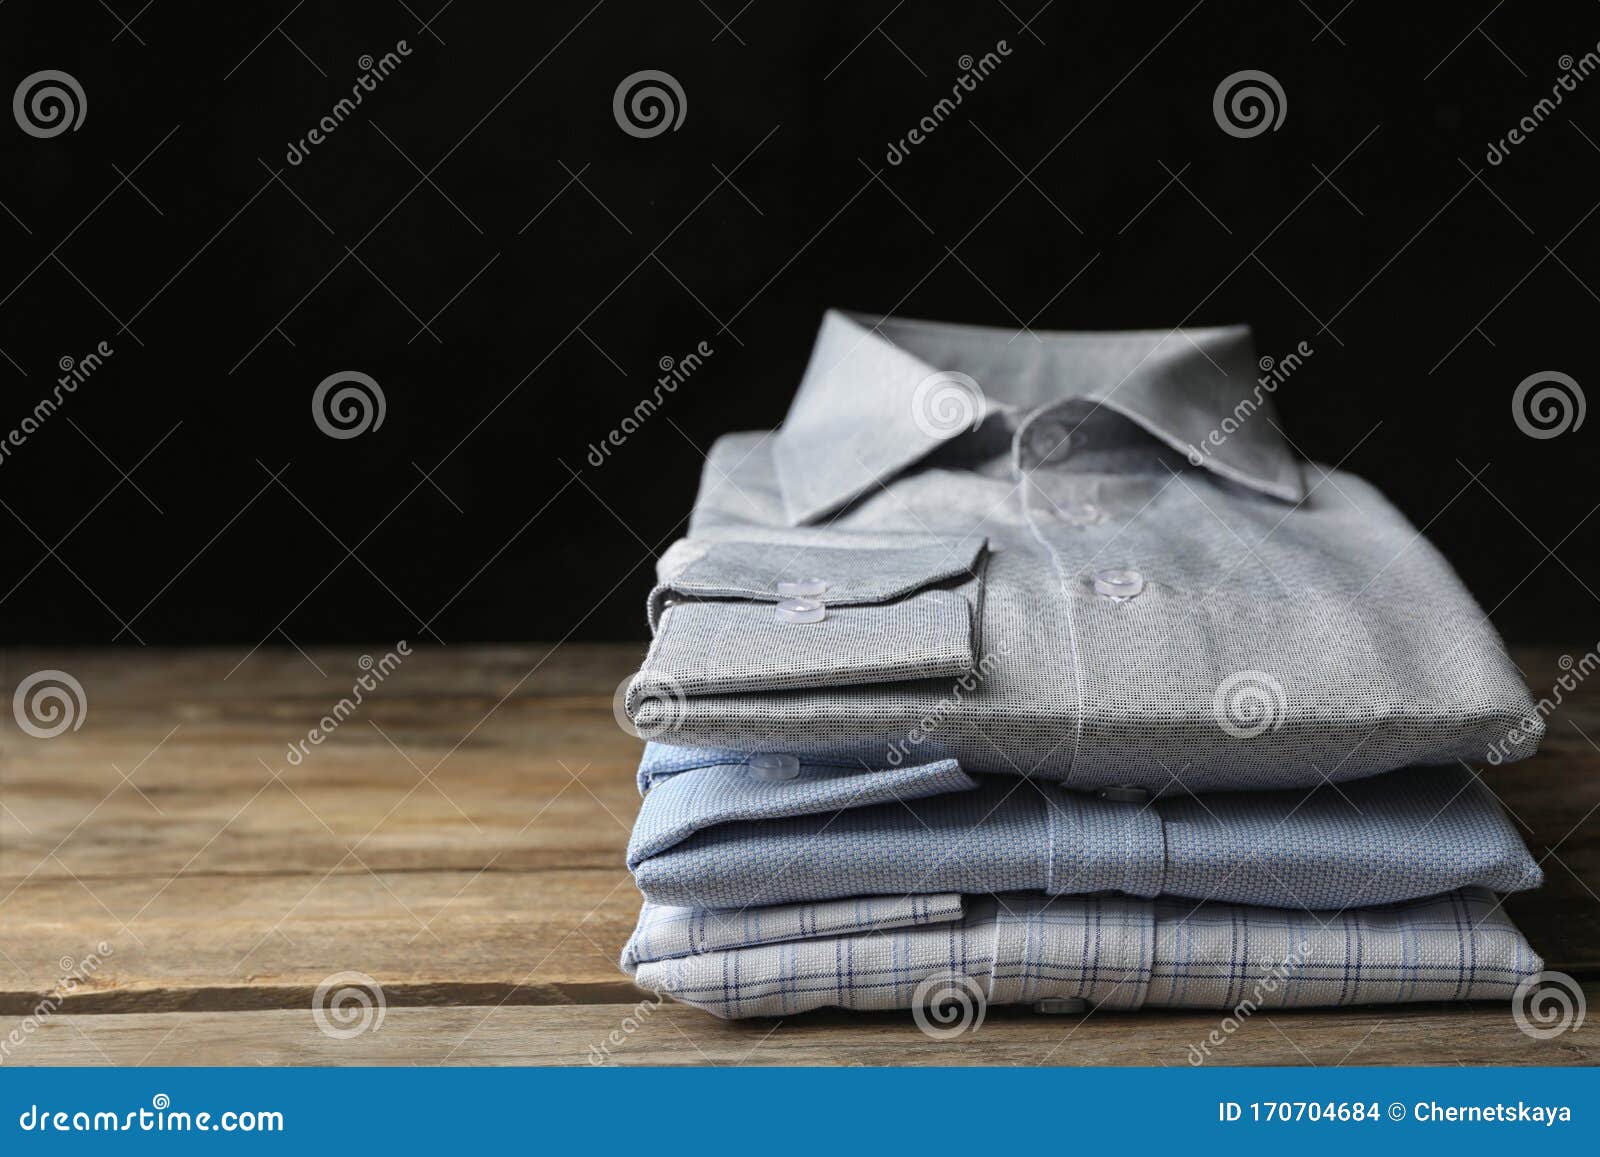 Stack of Classic Shirts on Table Stock Photo - Image of black, design ...